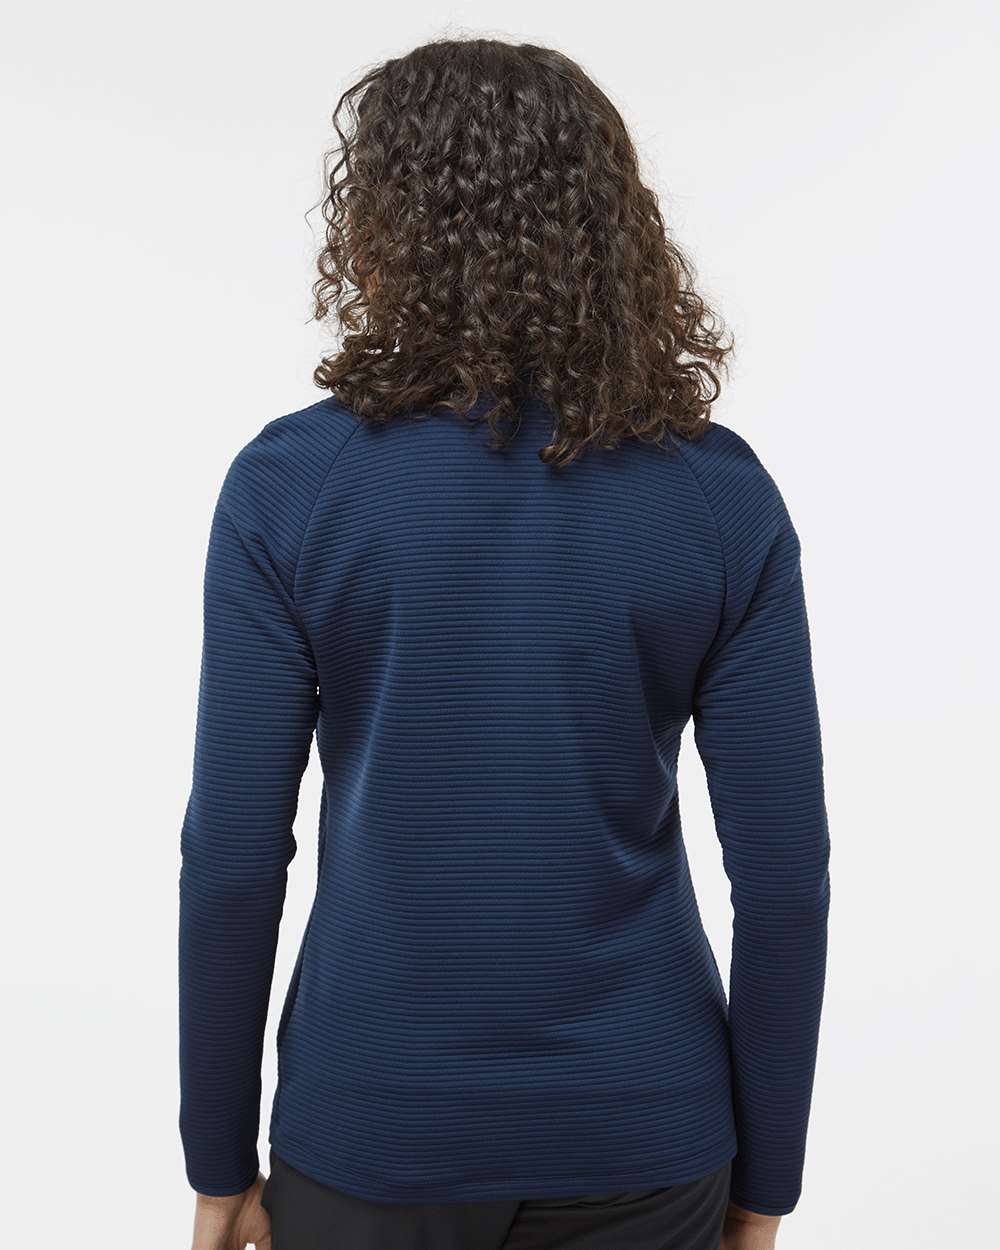 Adidas  A589 Women's Spacer Quarter-Zip Pullover #colormdl_Collegiate Navy